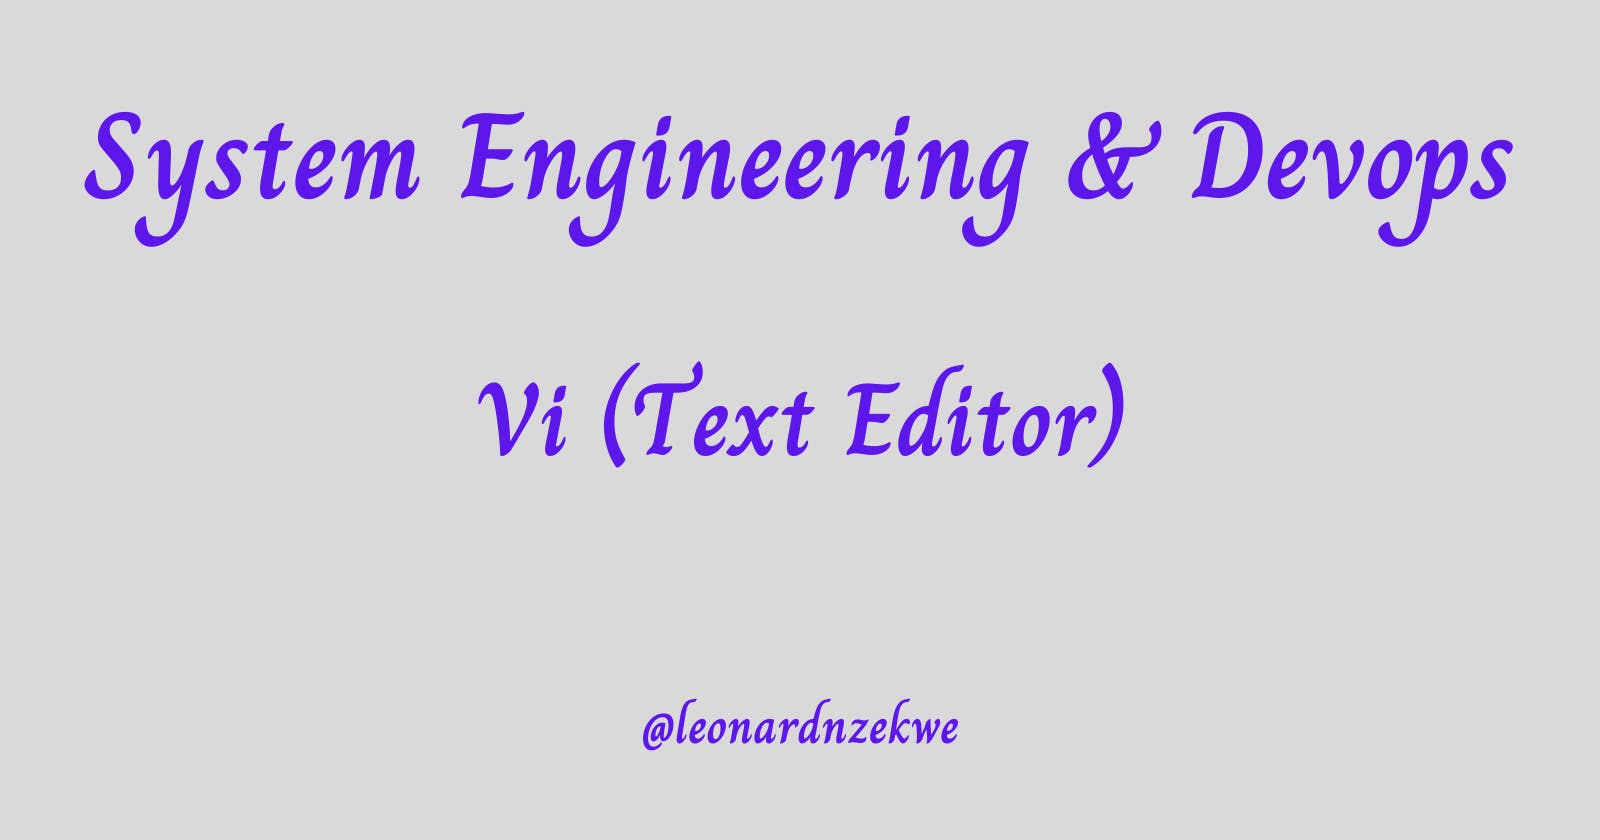 Vi Text Editor: An Essential Guide